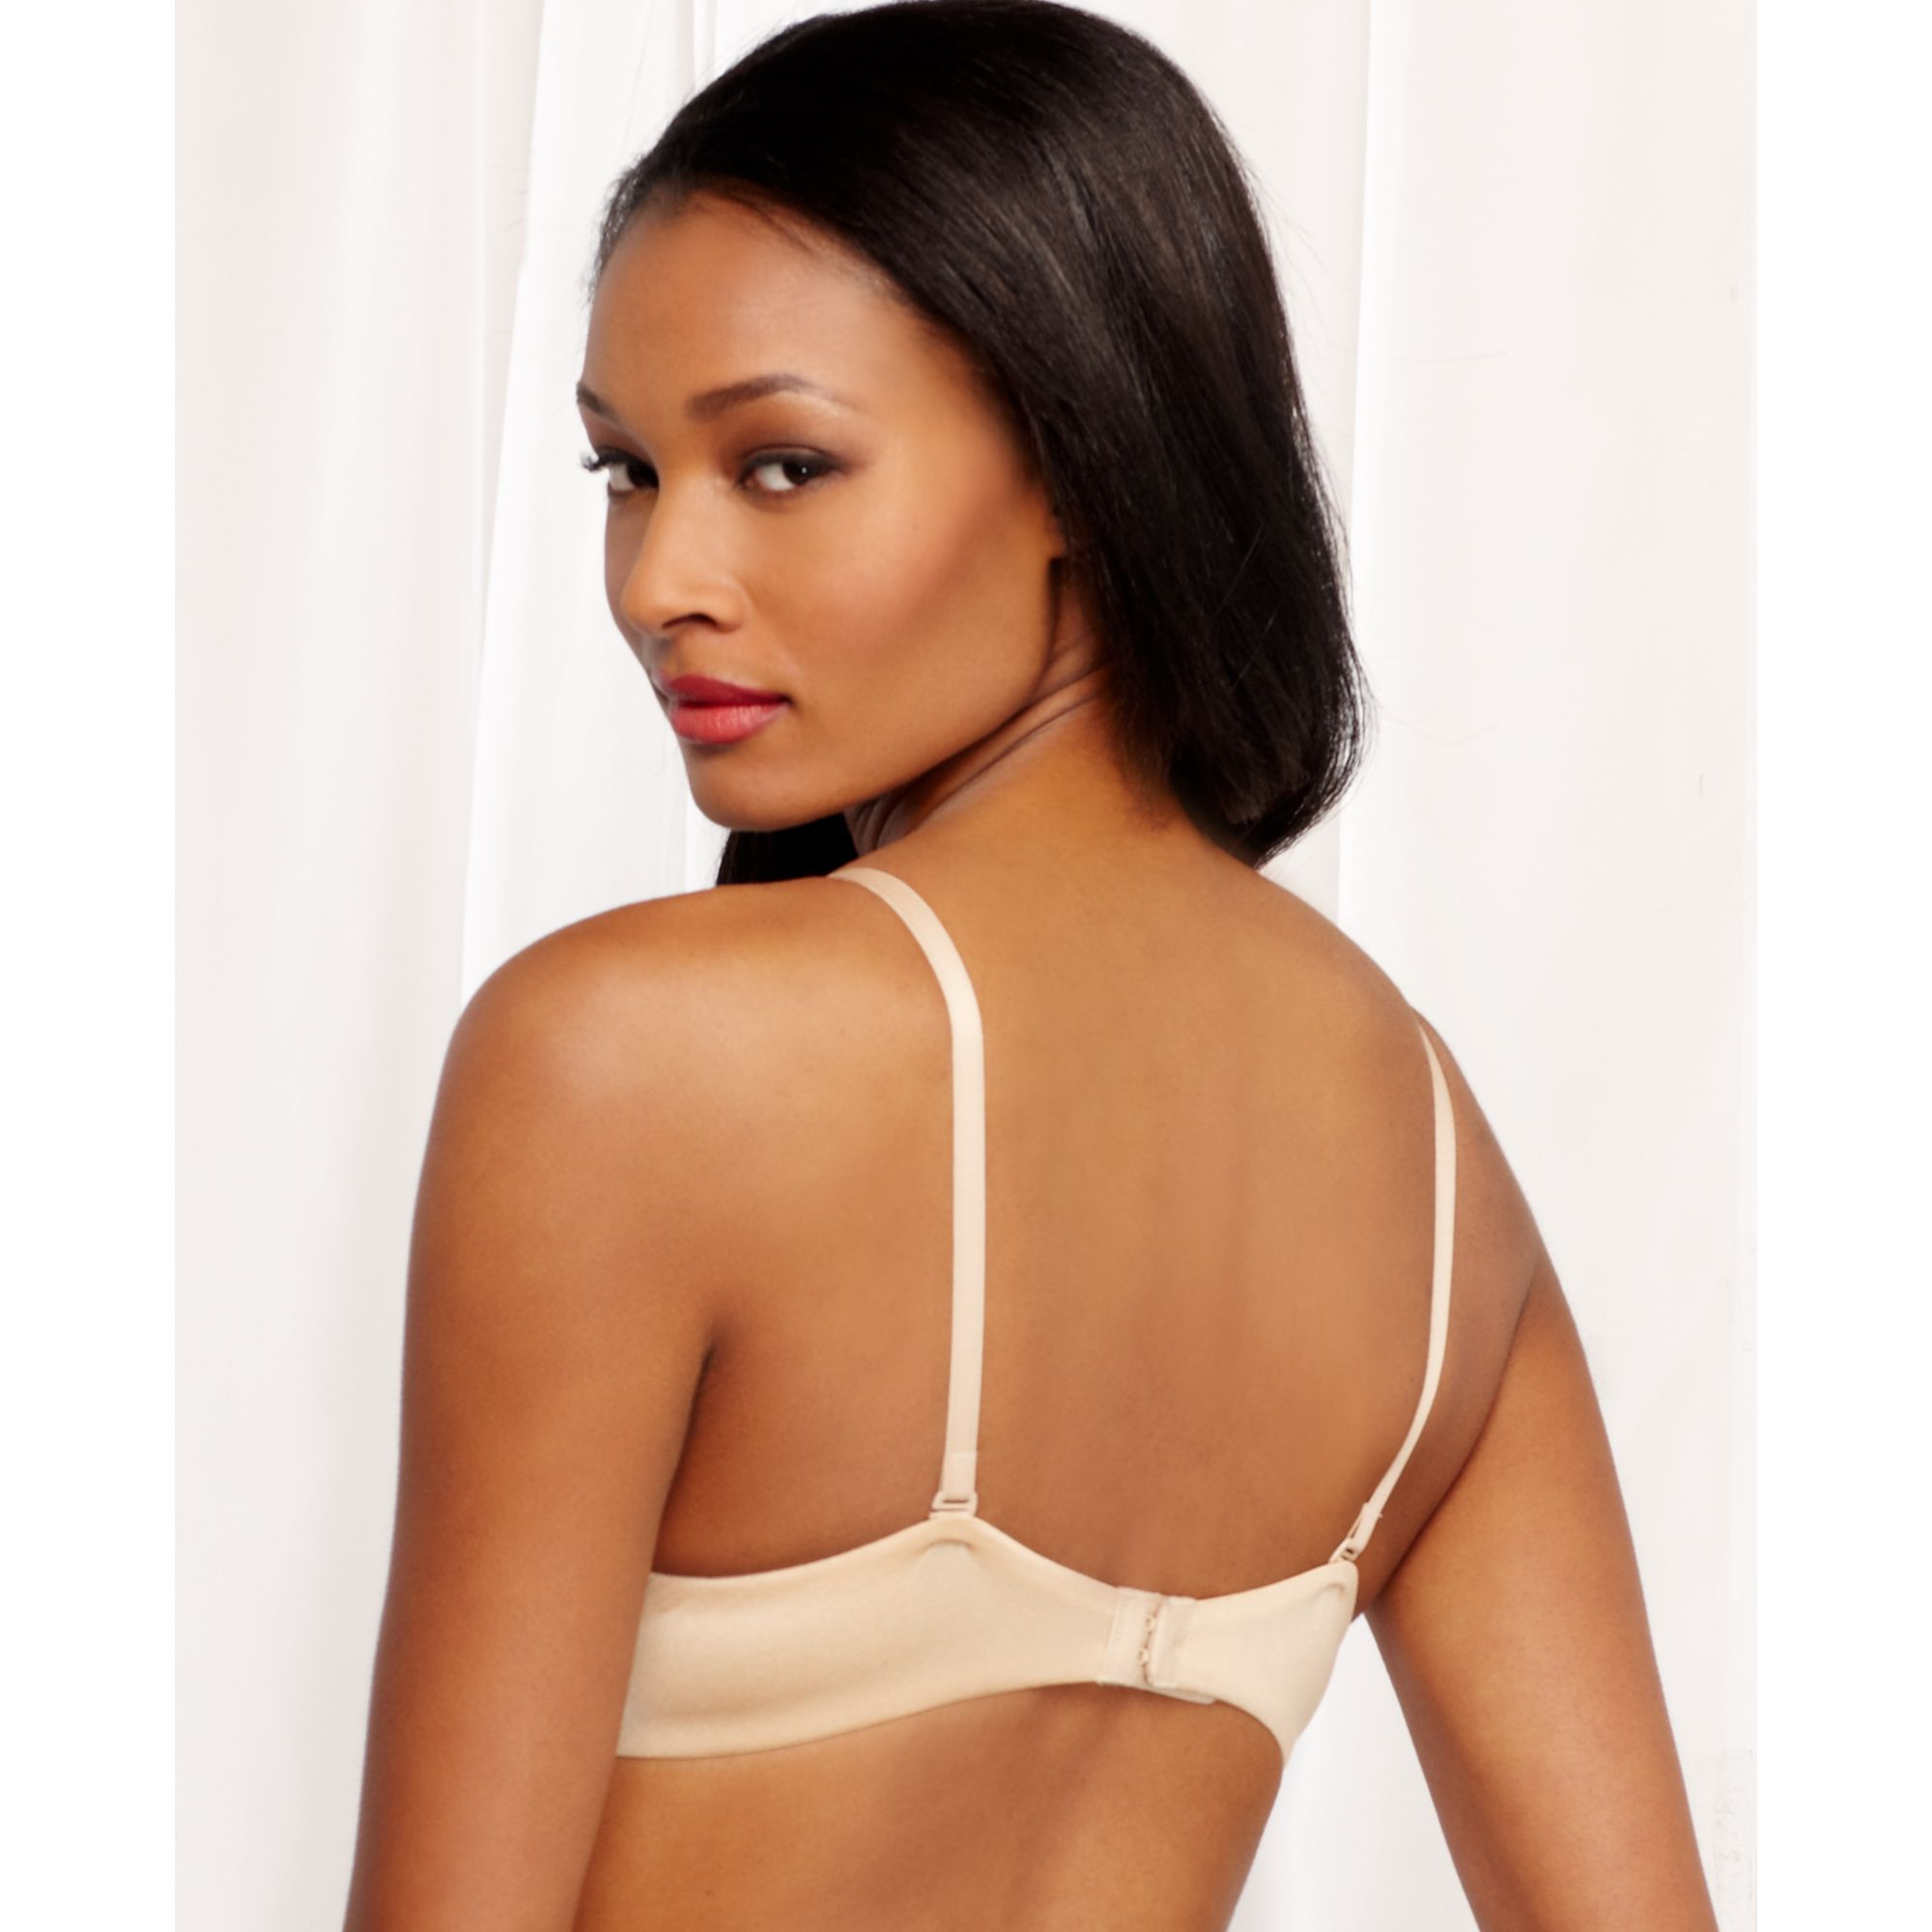 DKNY Super Glam Add 2 Cup Sizes Push Up Bra in White